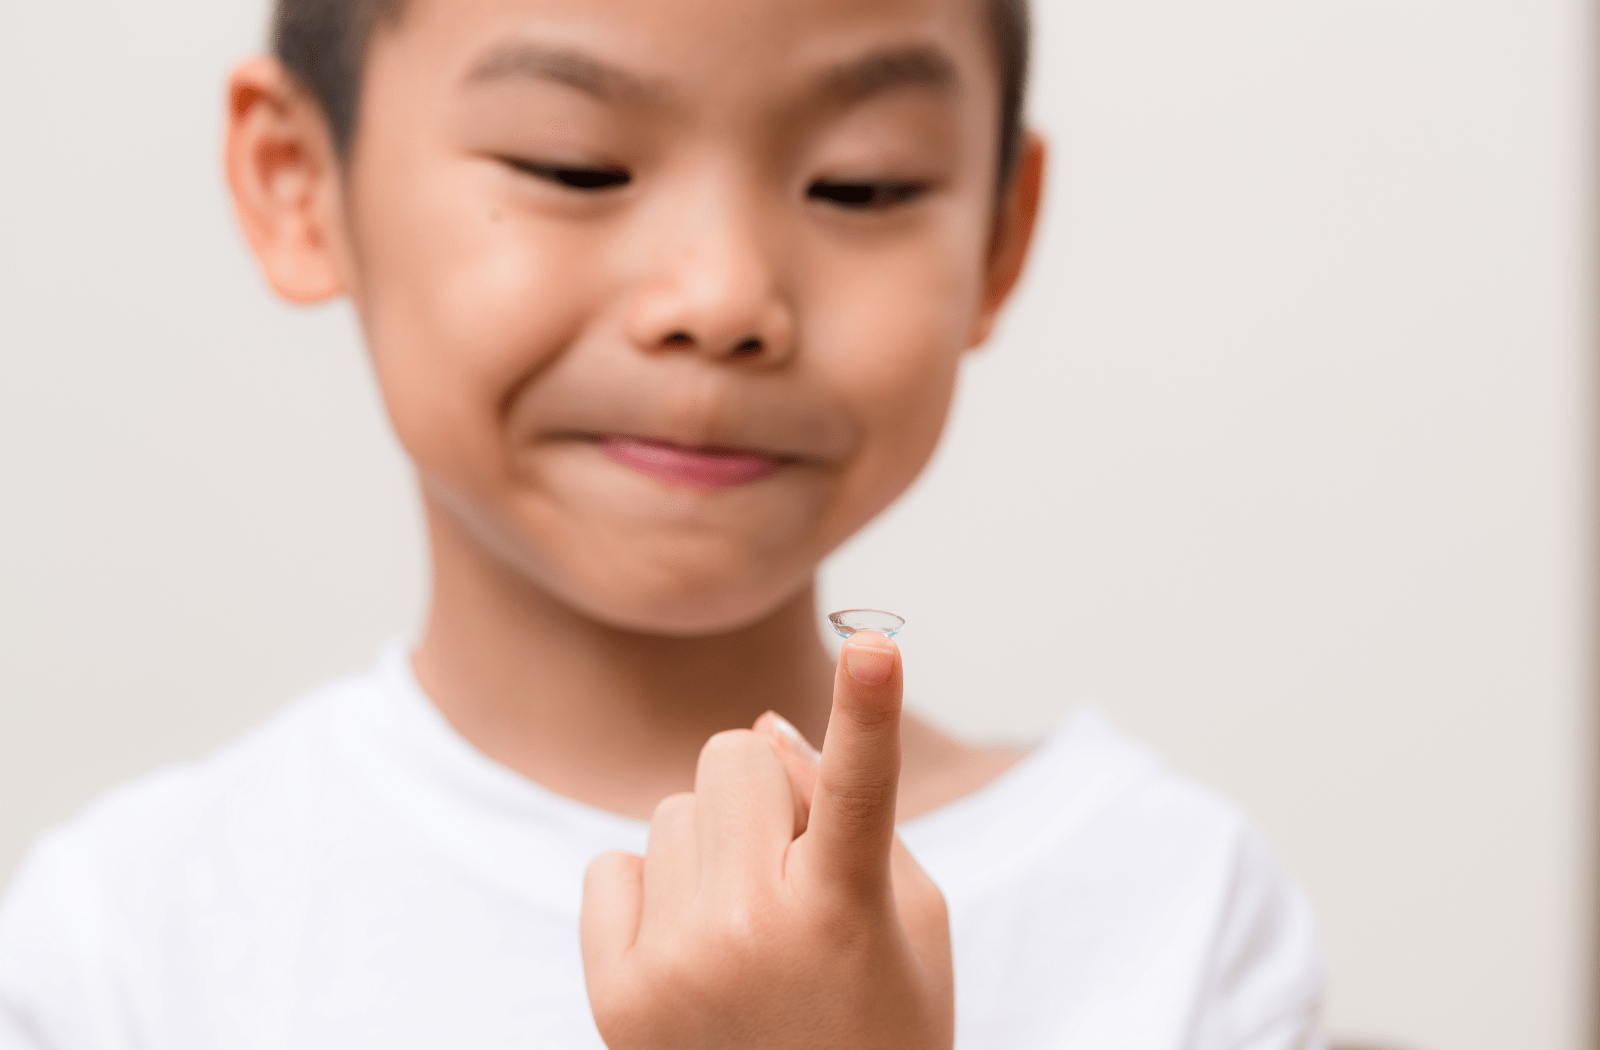 A boy in a white shirt holding a contact lens on the tip of his index finger